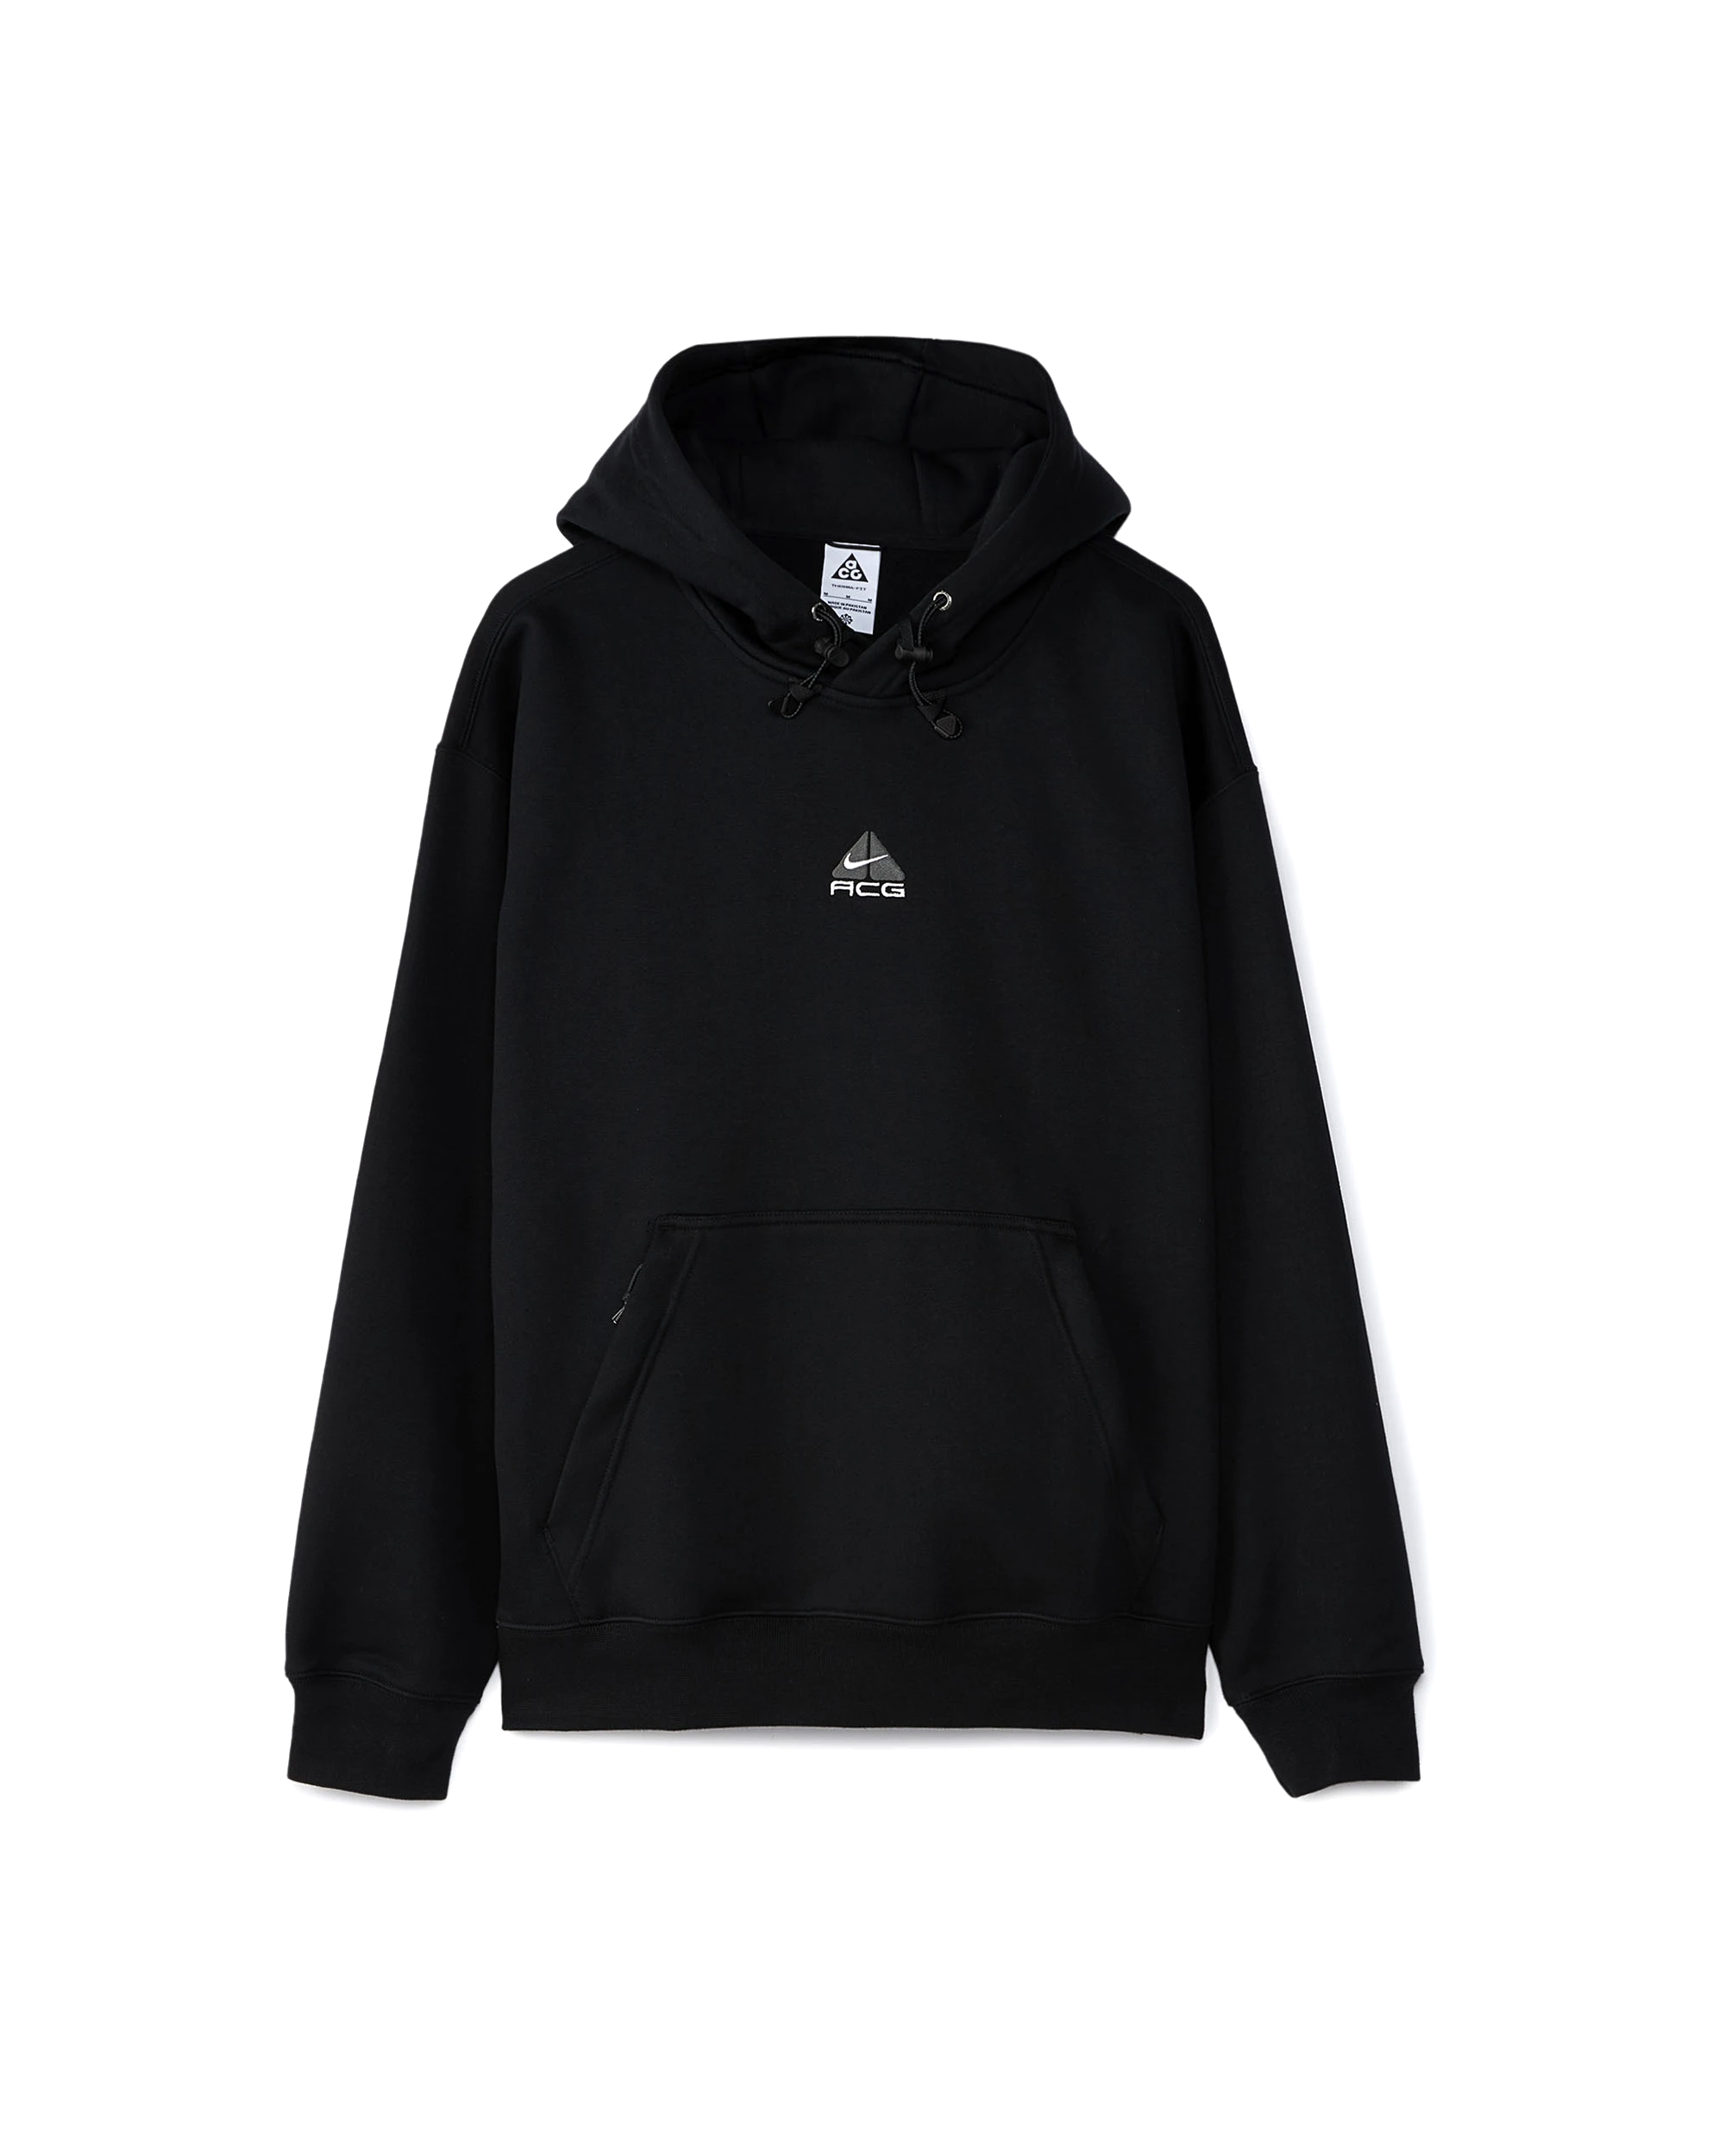 Therma FIT Hoodie - Black / Anthracite / Summit White